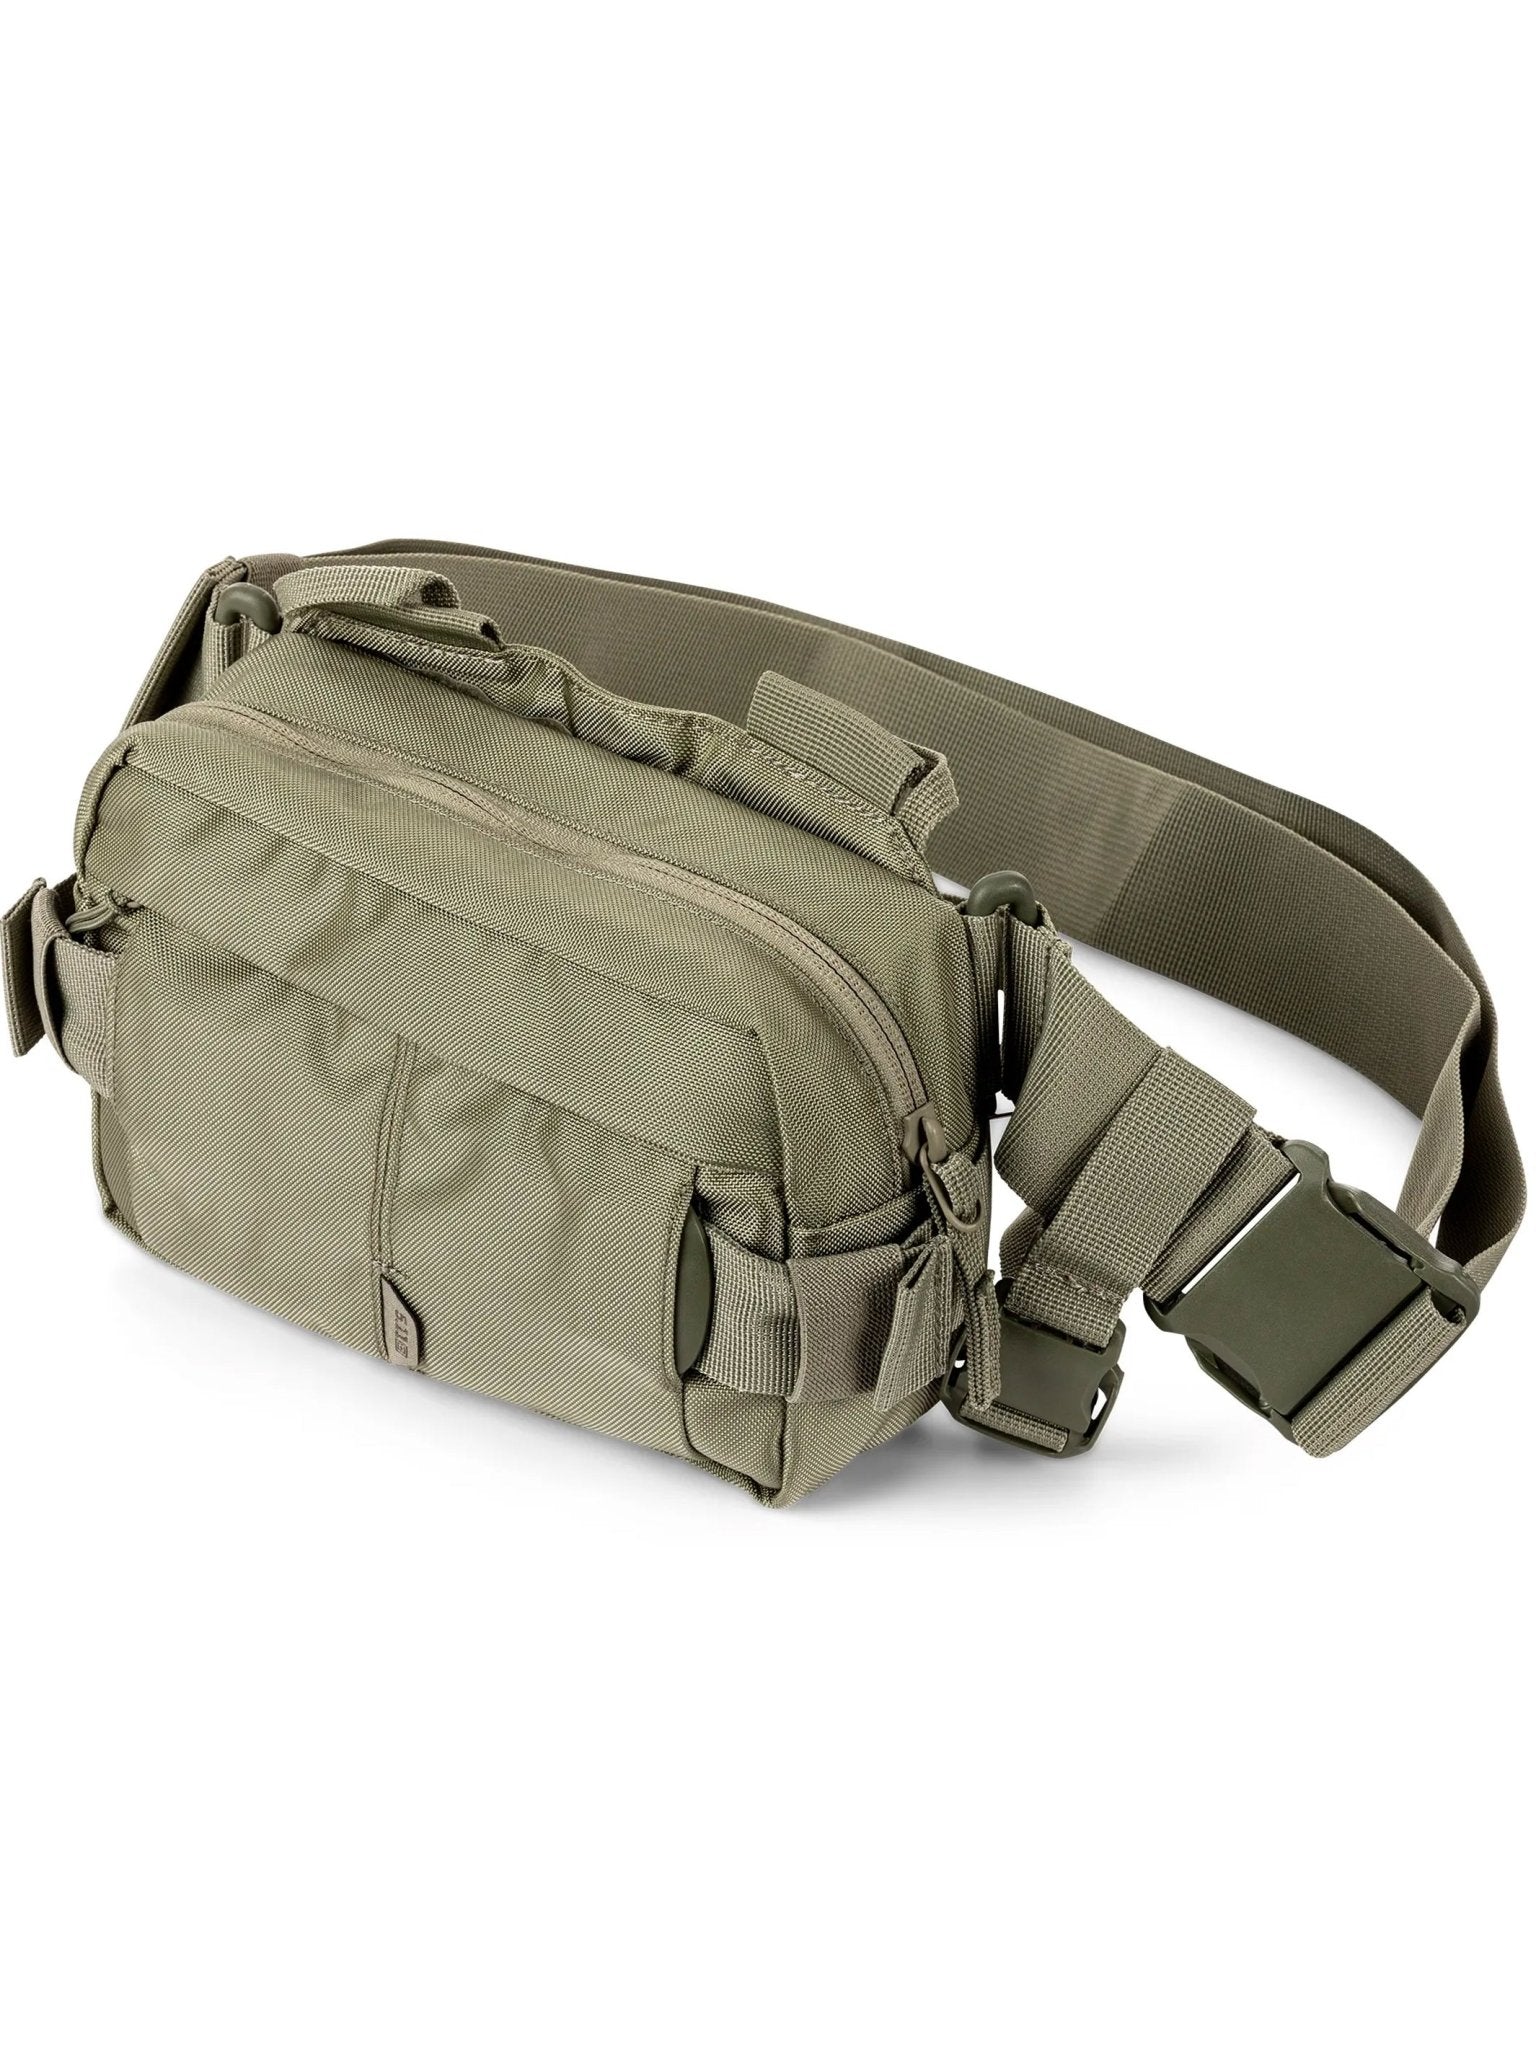 4elementsclothing5.11 Tactical5.11 Tactical - 5.11 Tactical LV6 WAIST PACK 2.0 3L - Style 56702Bag56702-256